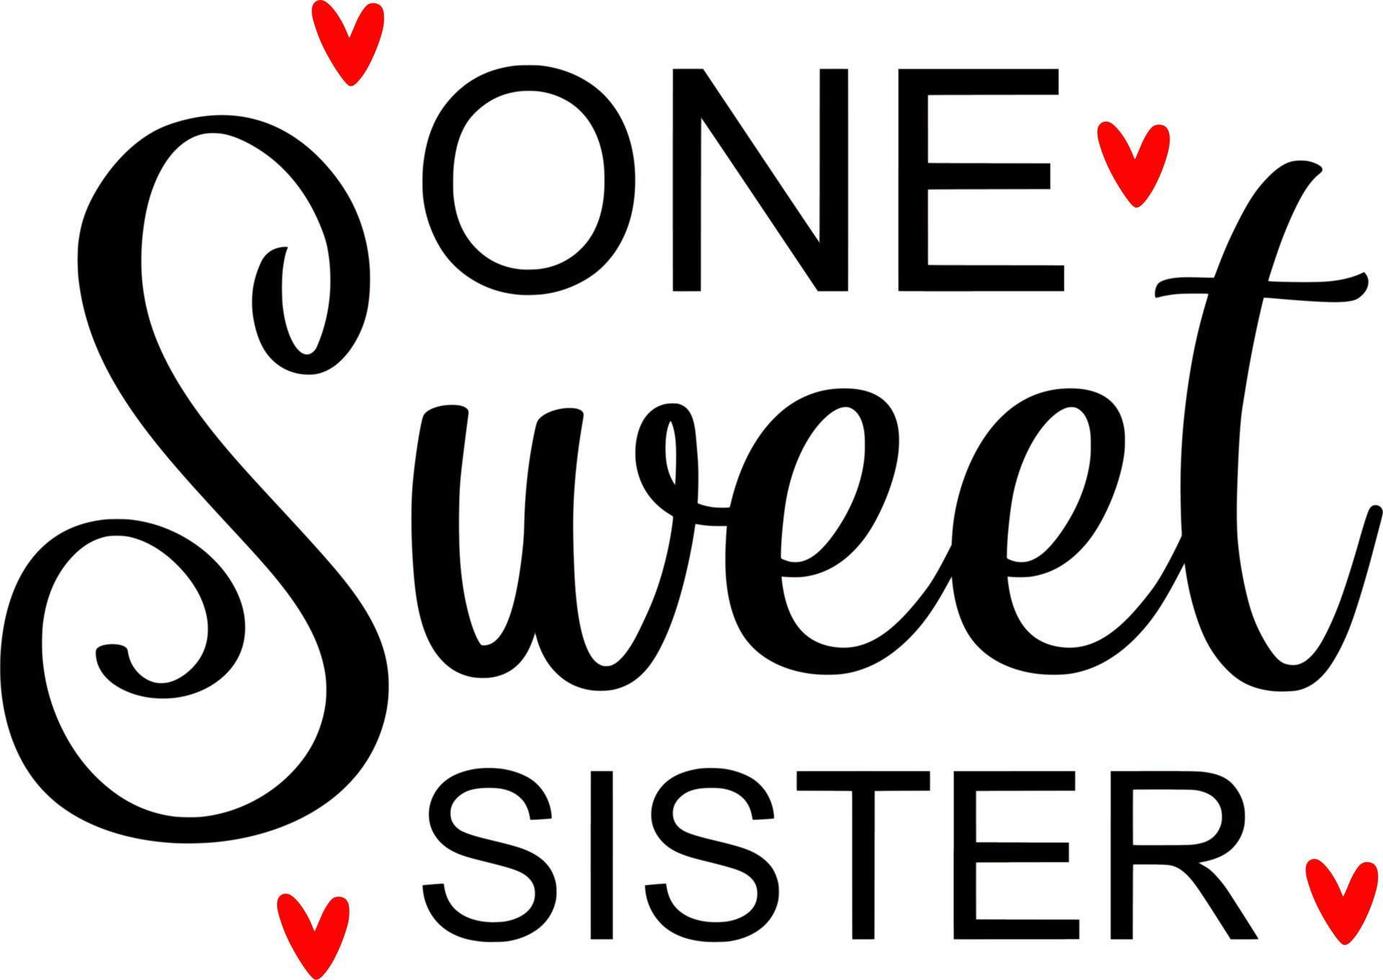 One sweet sister vector